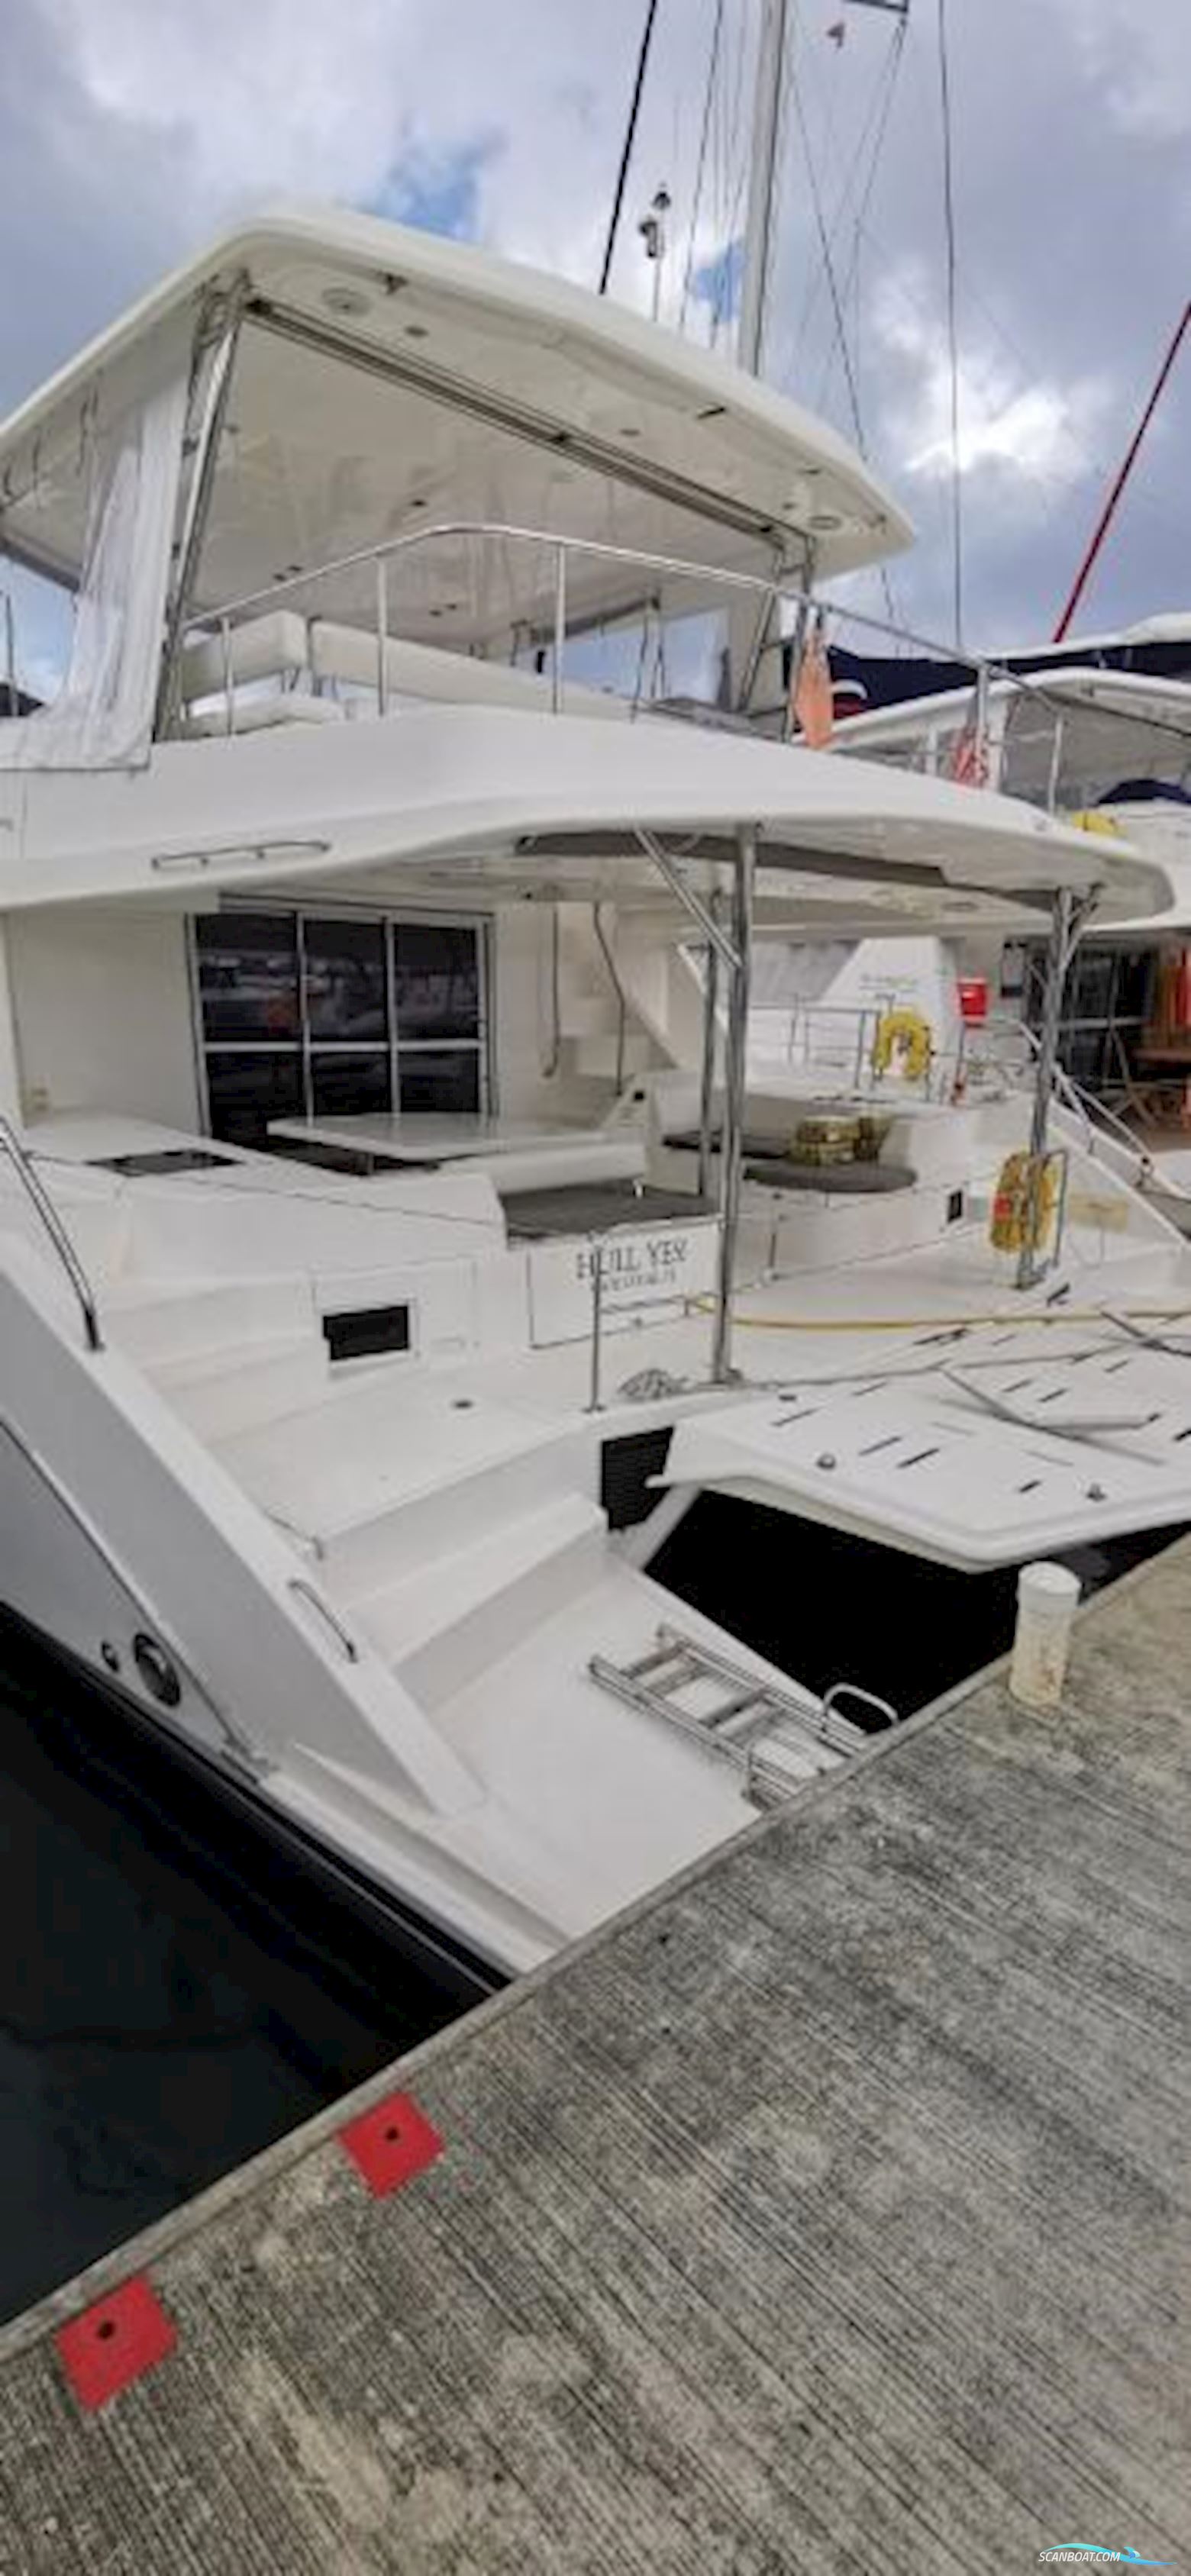 LEOPARD 51 Powercat Motor boat 2019, with Yanmar engine, No country info